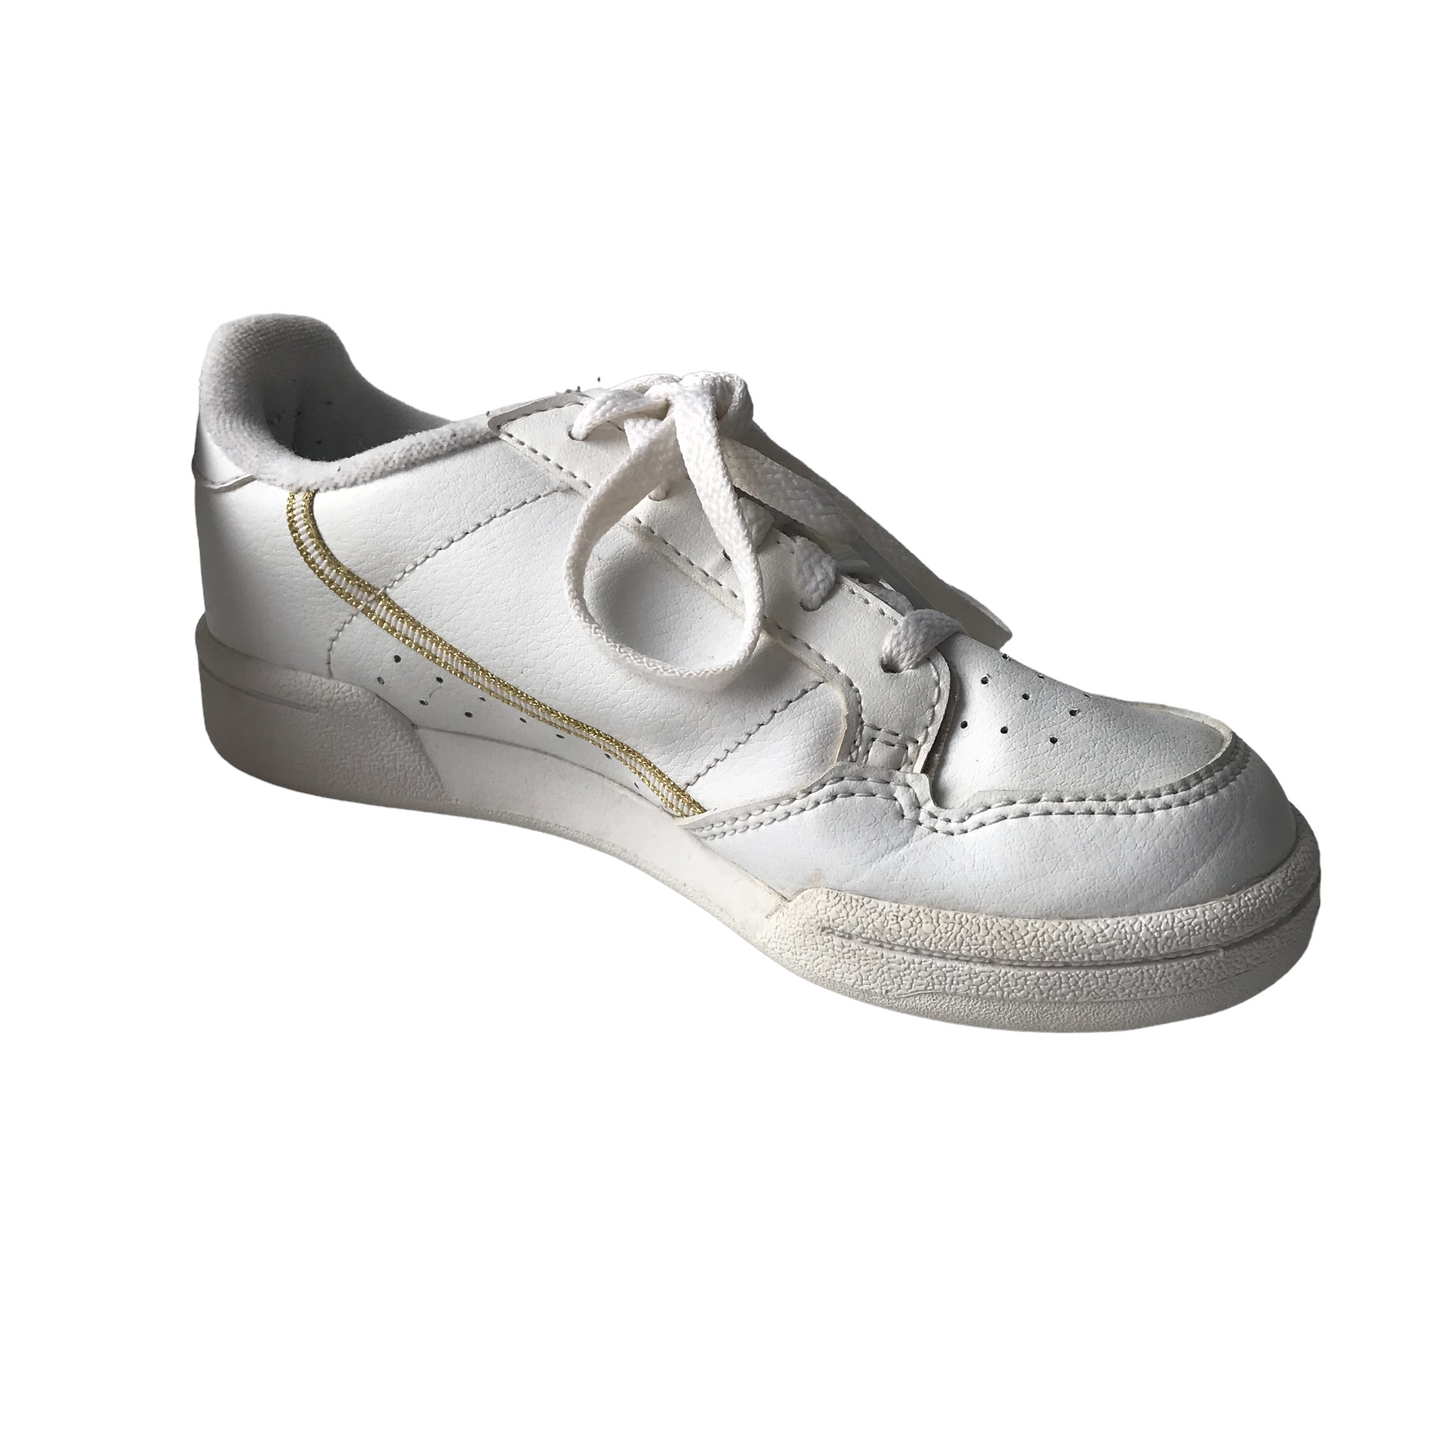 Adidas White and Gold detailed Trainers Size UK 12K junior